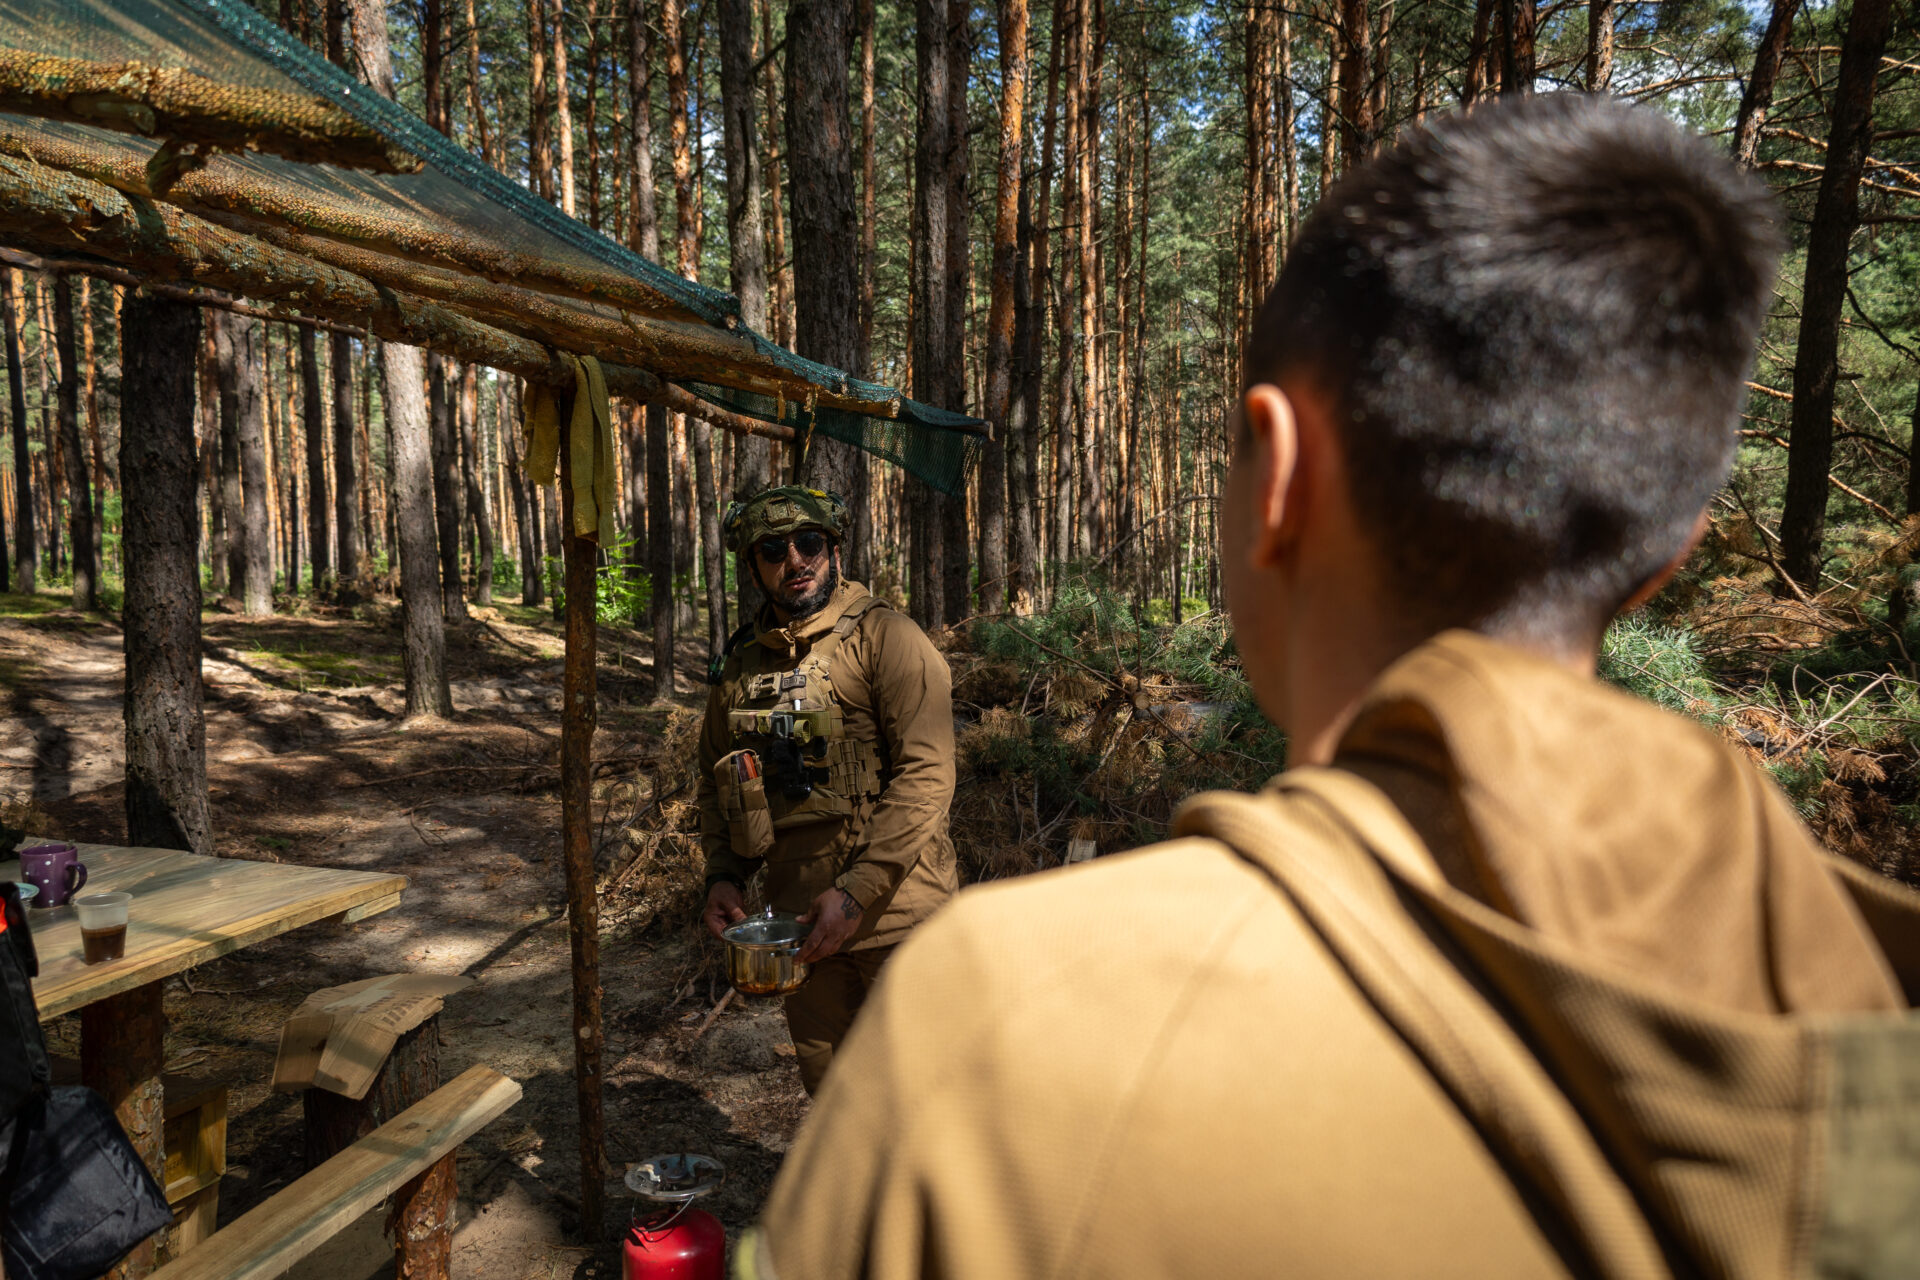 Captain Shustriy, a company commander in Ukraine’s 14th Separate Mechanized Brigade, speaks with Czech, a combat medic, at a position along the frontlines in northeast Ukraine in mid-July.